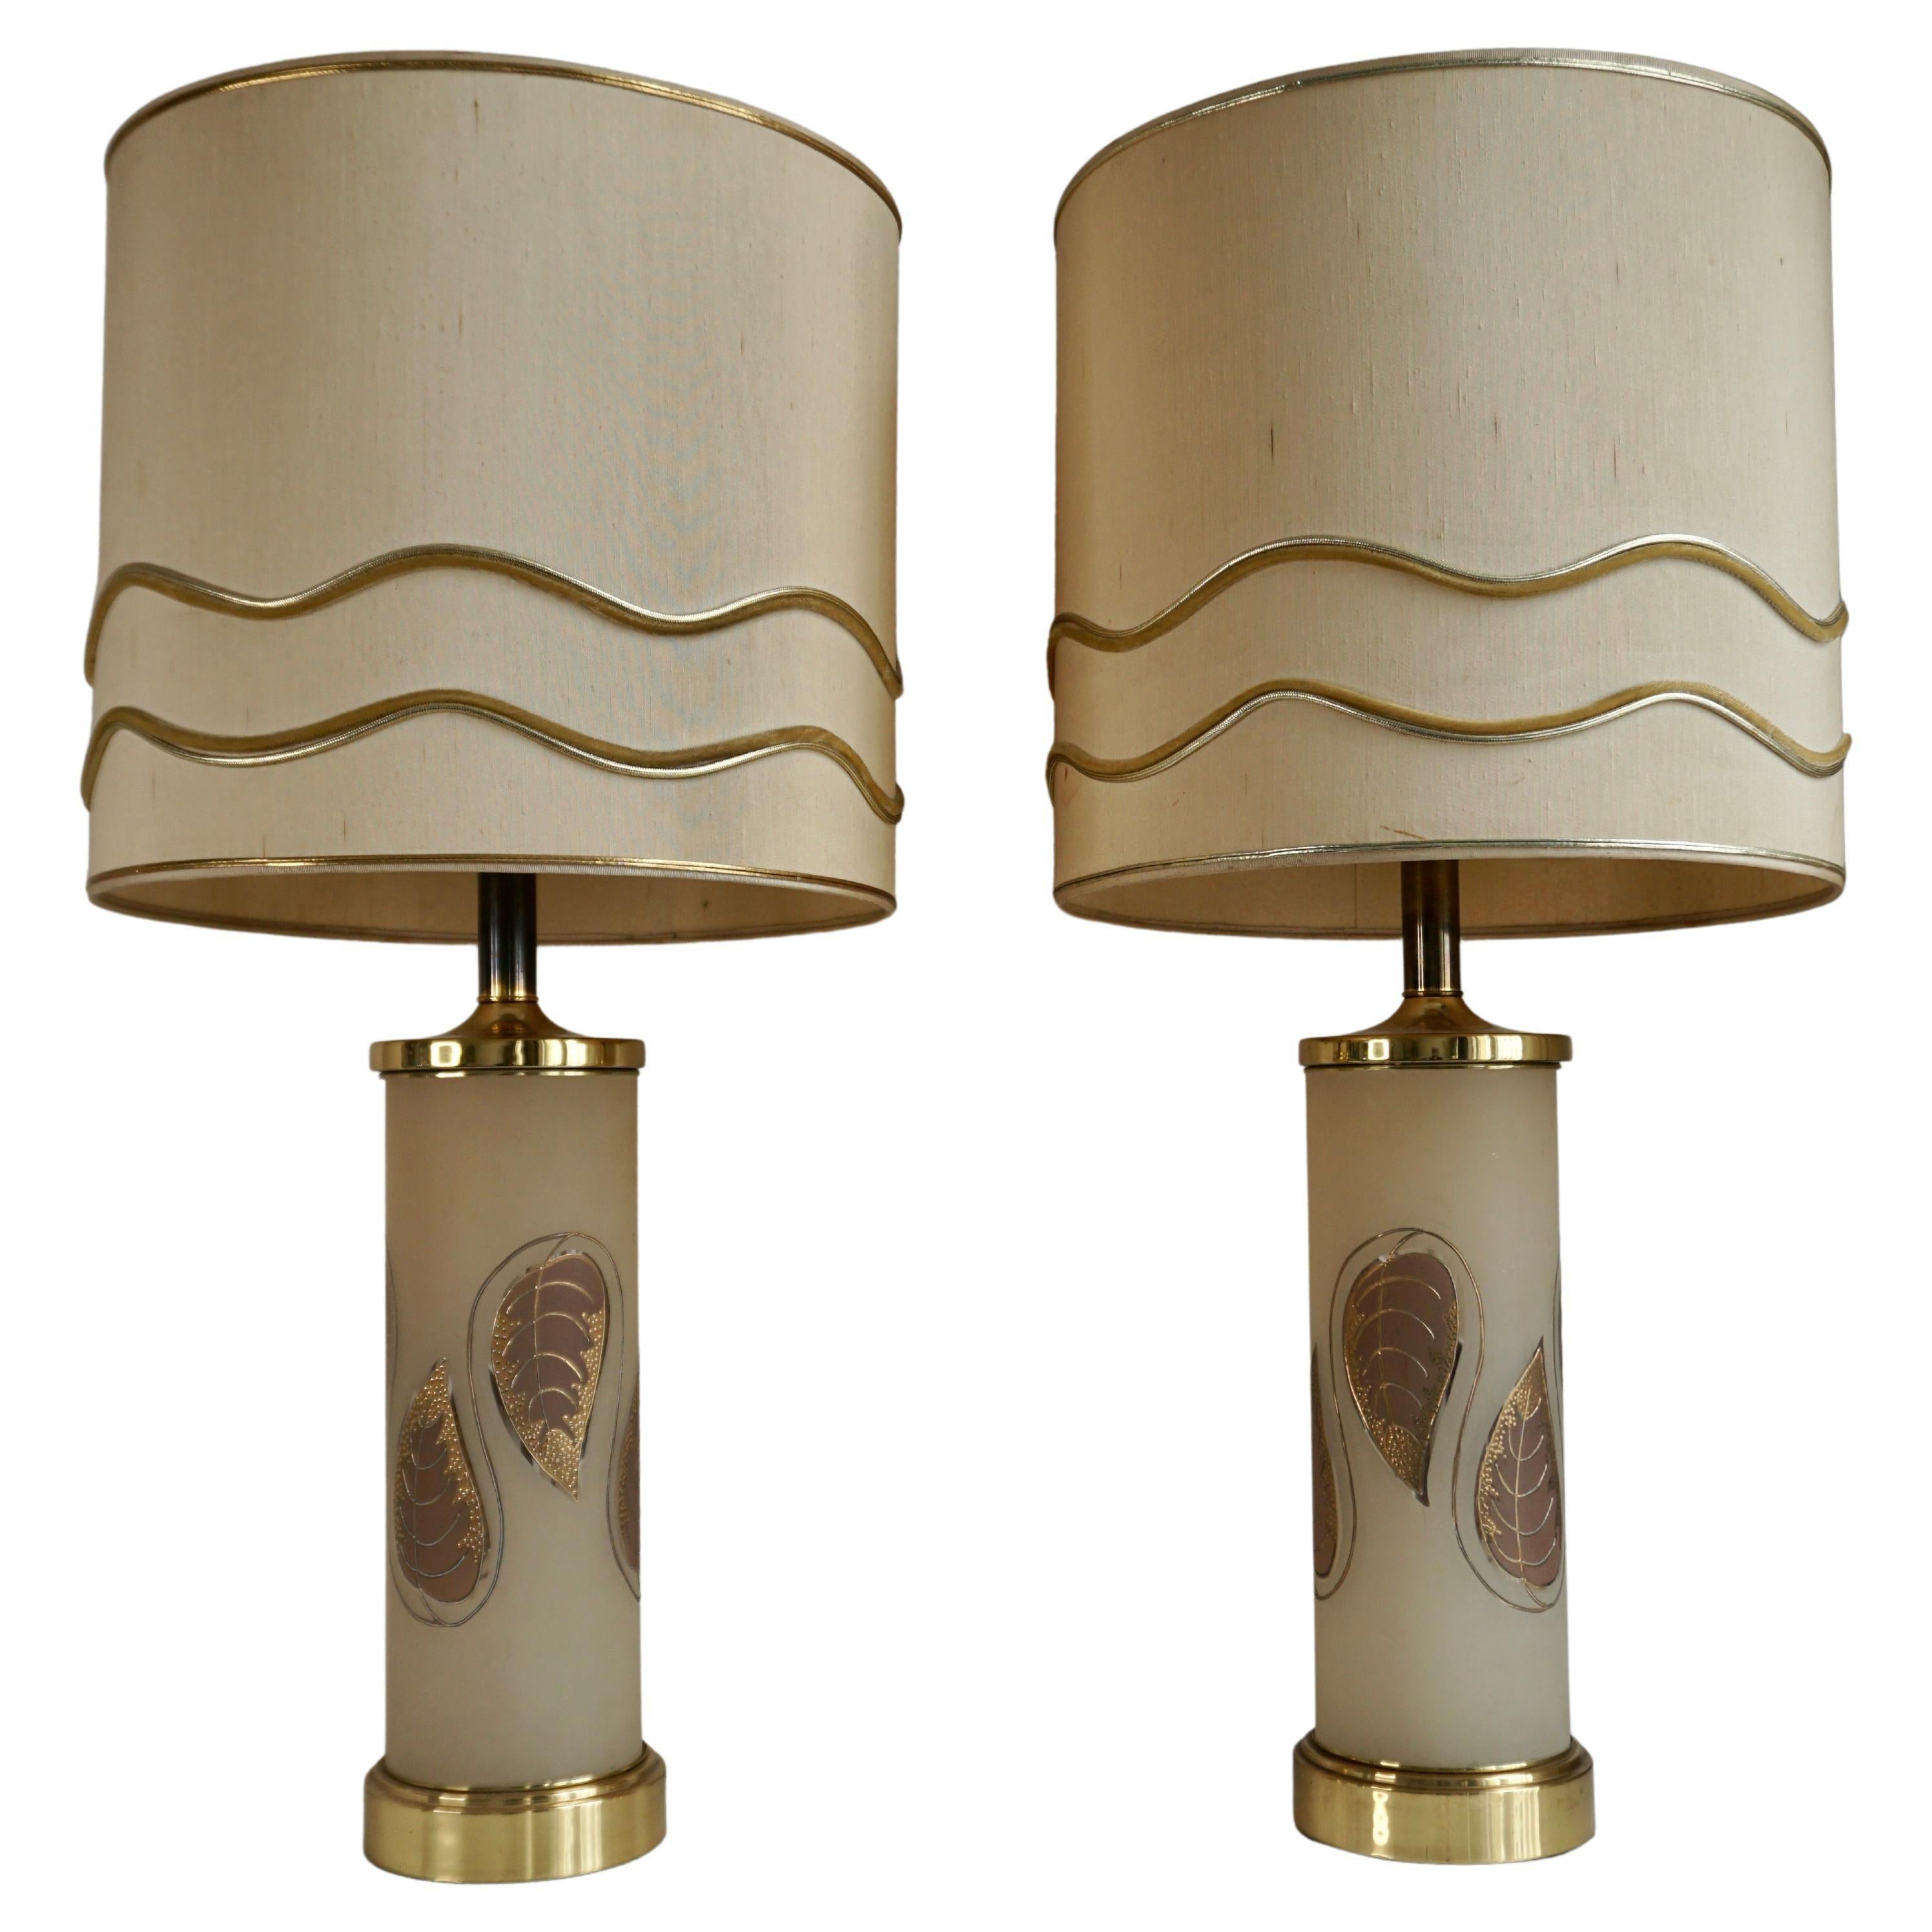 Pair of monumental table lamps created in the early 1970s in the style of Carl Falkenstein, Marbro and Rembrandt lighting. The ultimate in midcentury Hollywood Regency including original gold leaves and high quality construction and fittings.